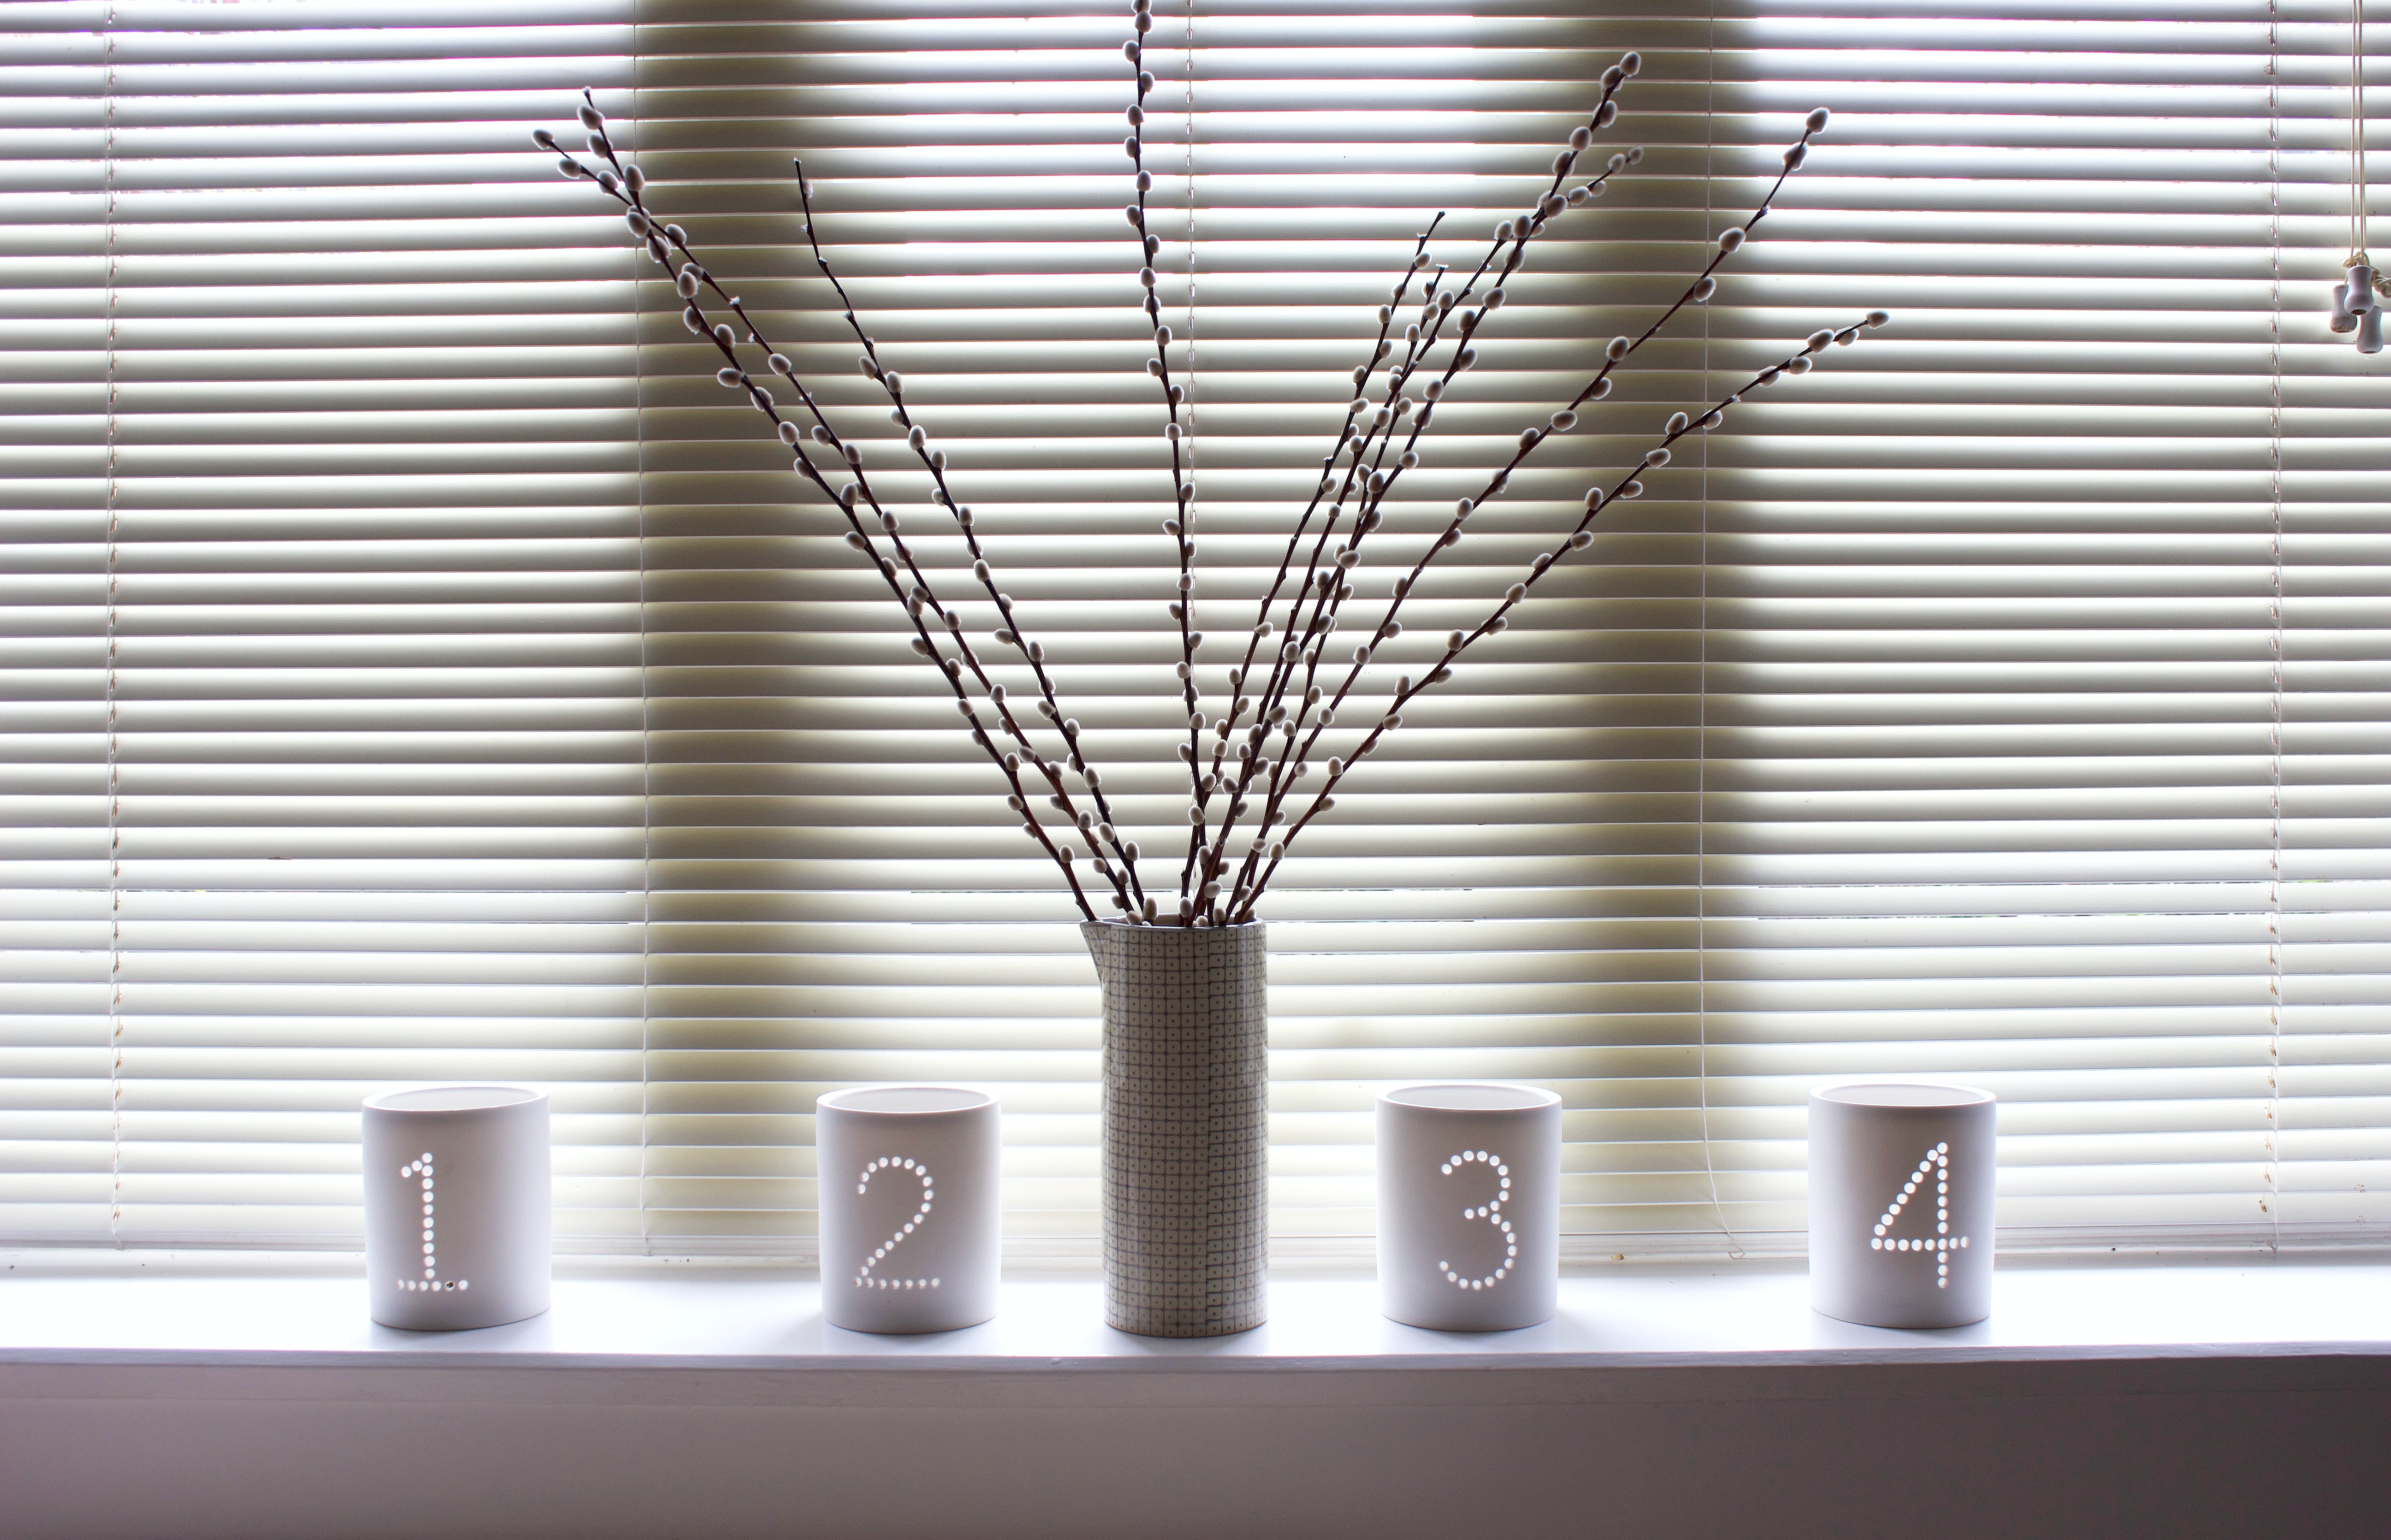 Why Choose Fitted Blinds For Your Windows?